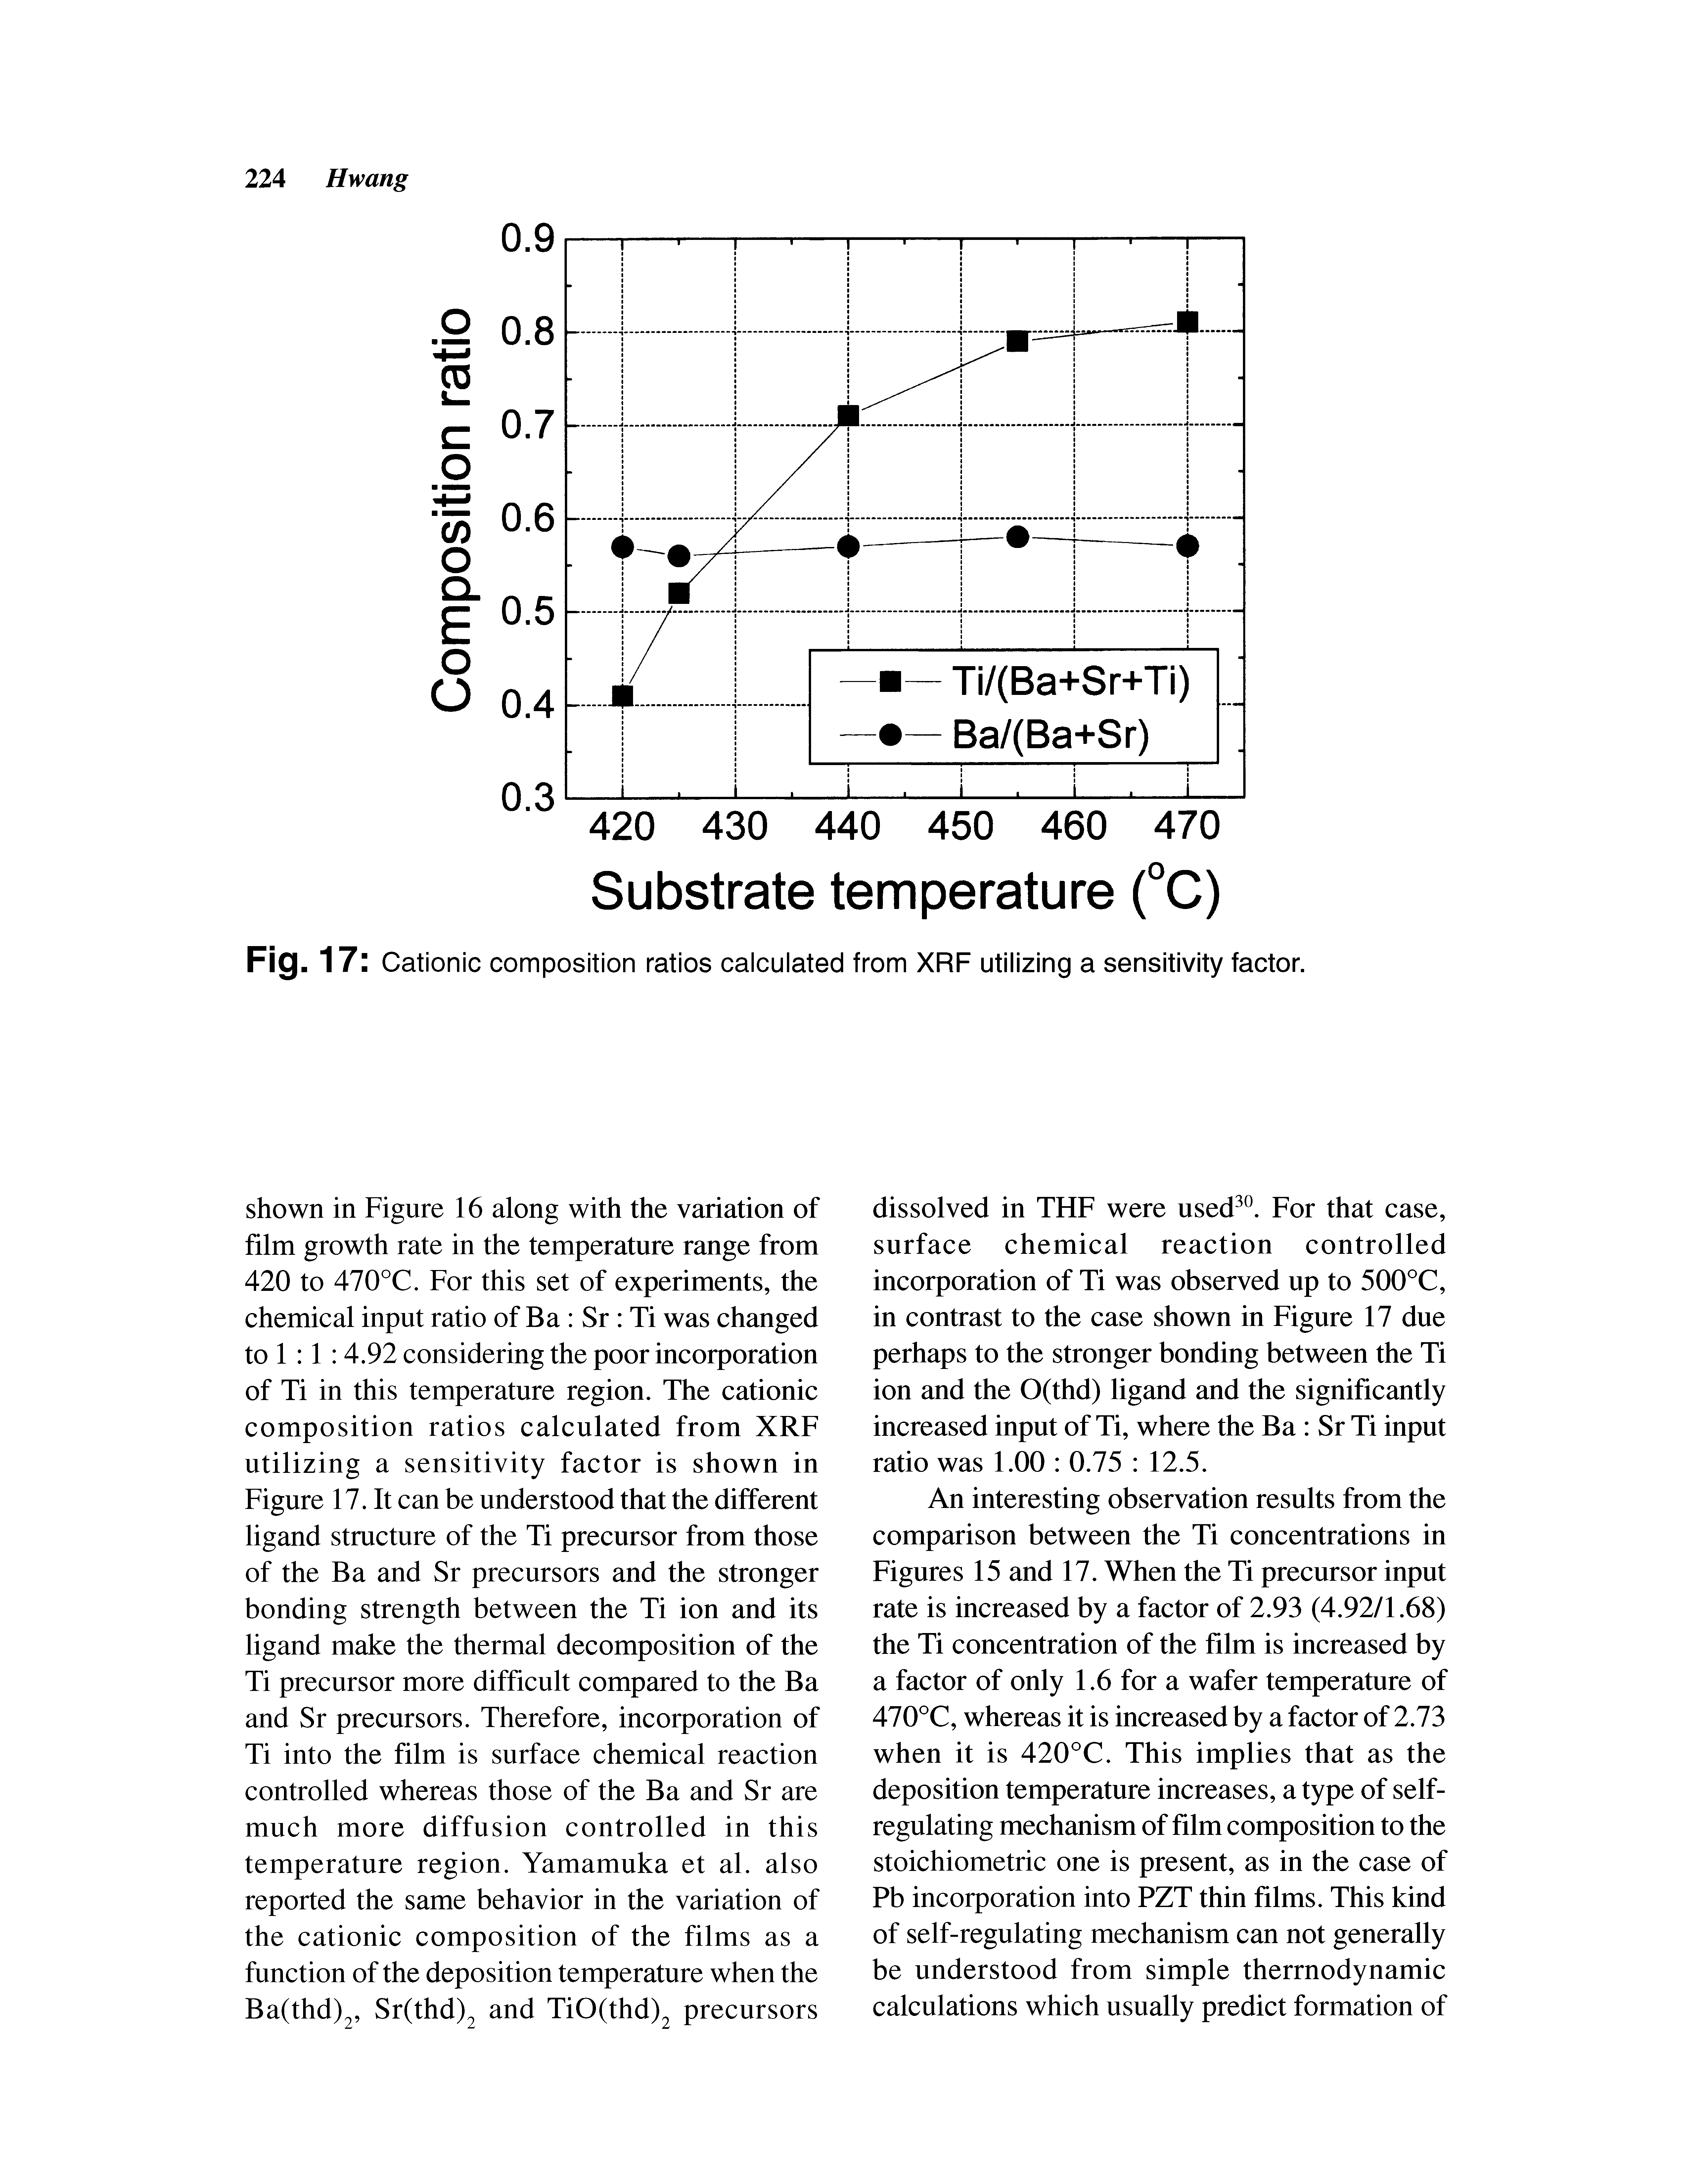 Fig. 17 Cationic composition ratios calculated from XRF utilizing a sensitivity factor.